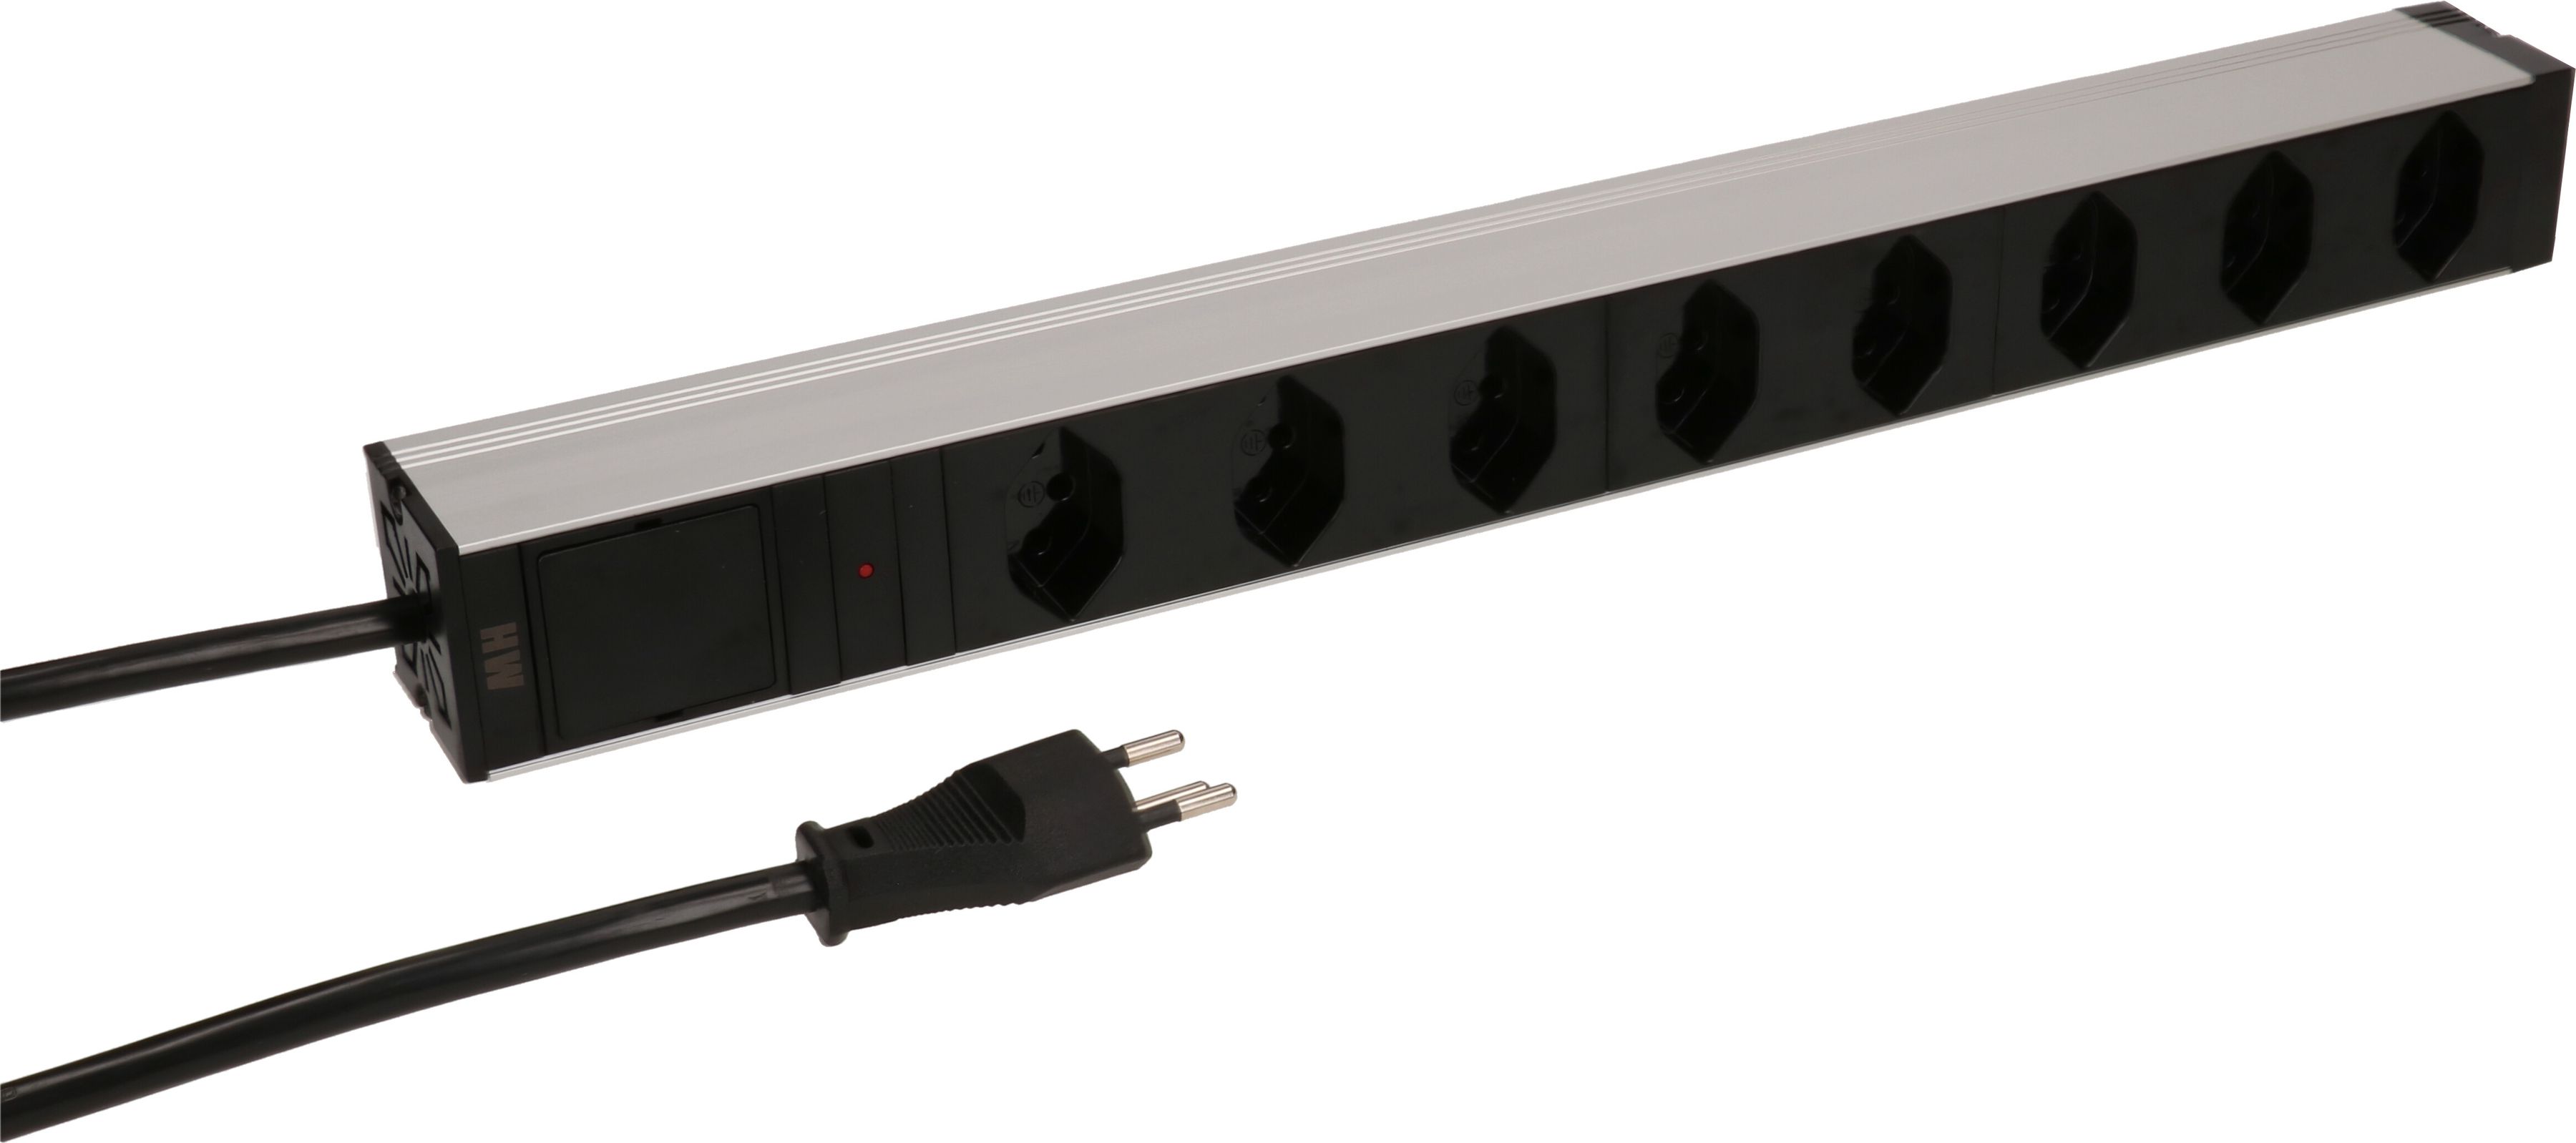 PDU 19" 8x Typ13 black 1HE, reconnectable cable